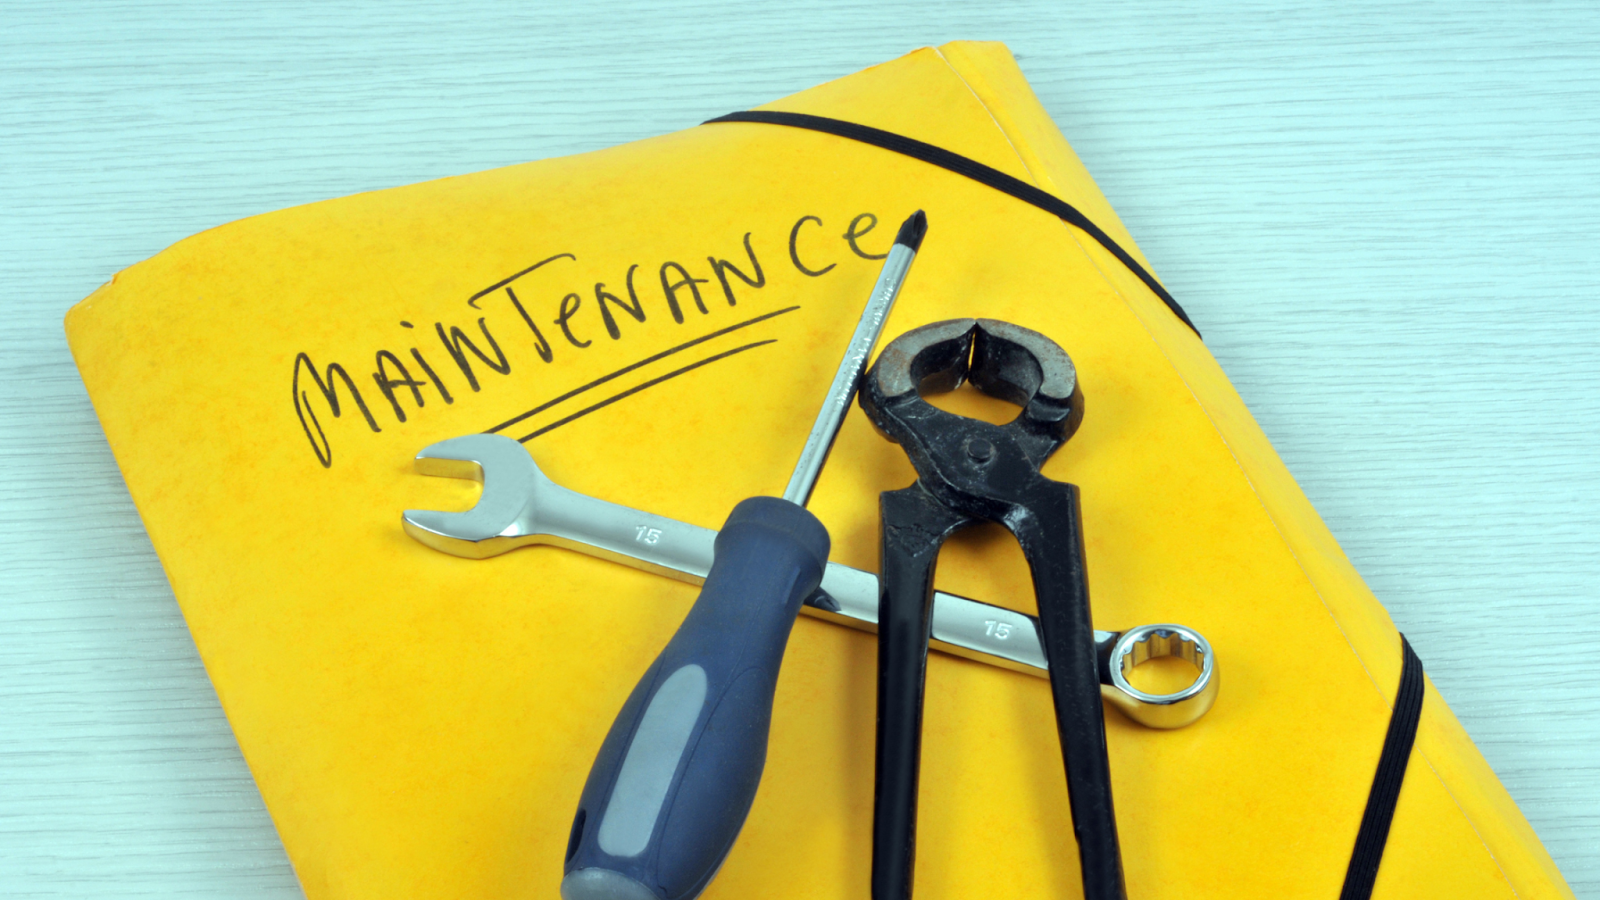 Tools placed on top of maintenance book